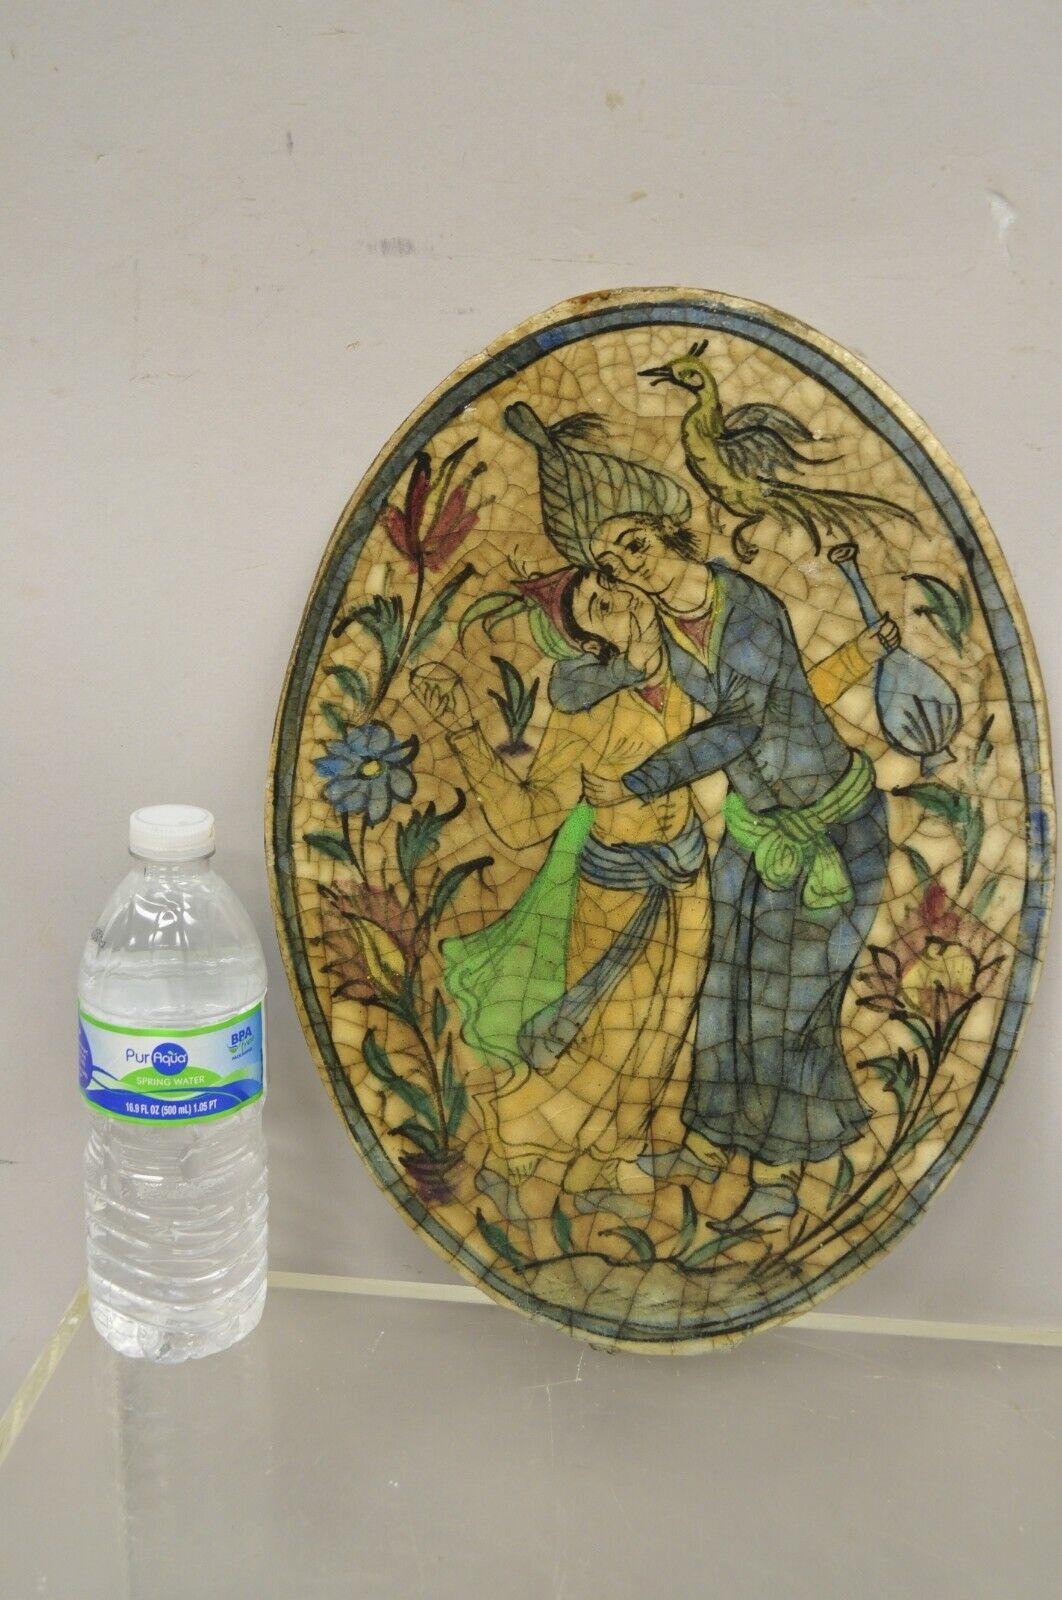 Antique Persian Iznik Qajar style oval ceramic pottery tile Loving Embrace C2. Original crackle glazed finish, heavy ceramic pottery construction, very impressive detail, wonderful style and form. Great to mount as wall art or accent tiles for